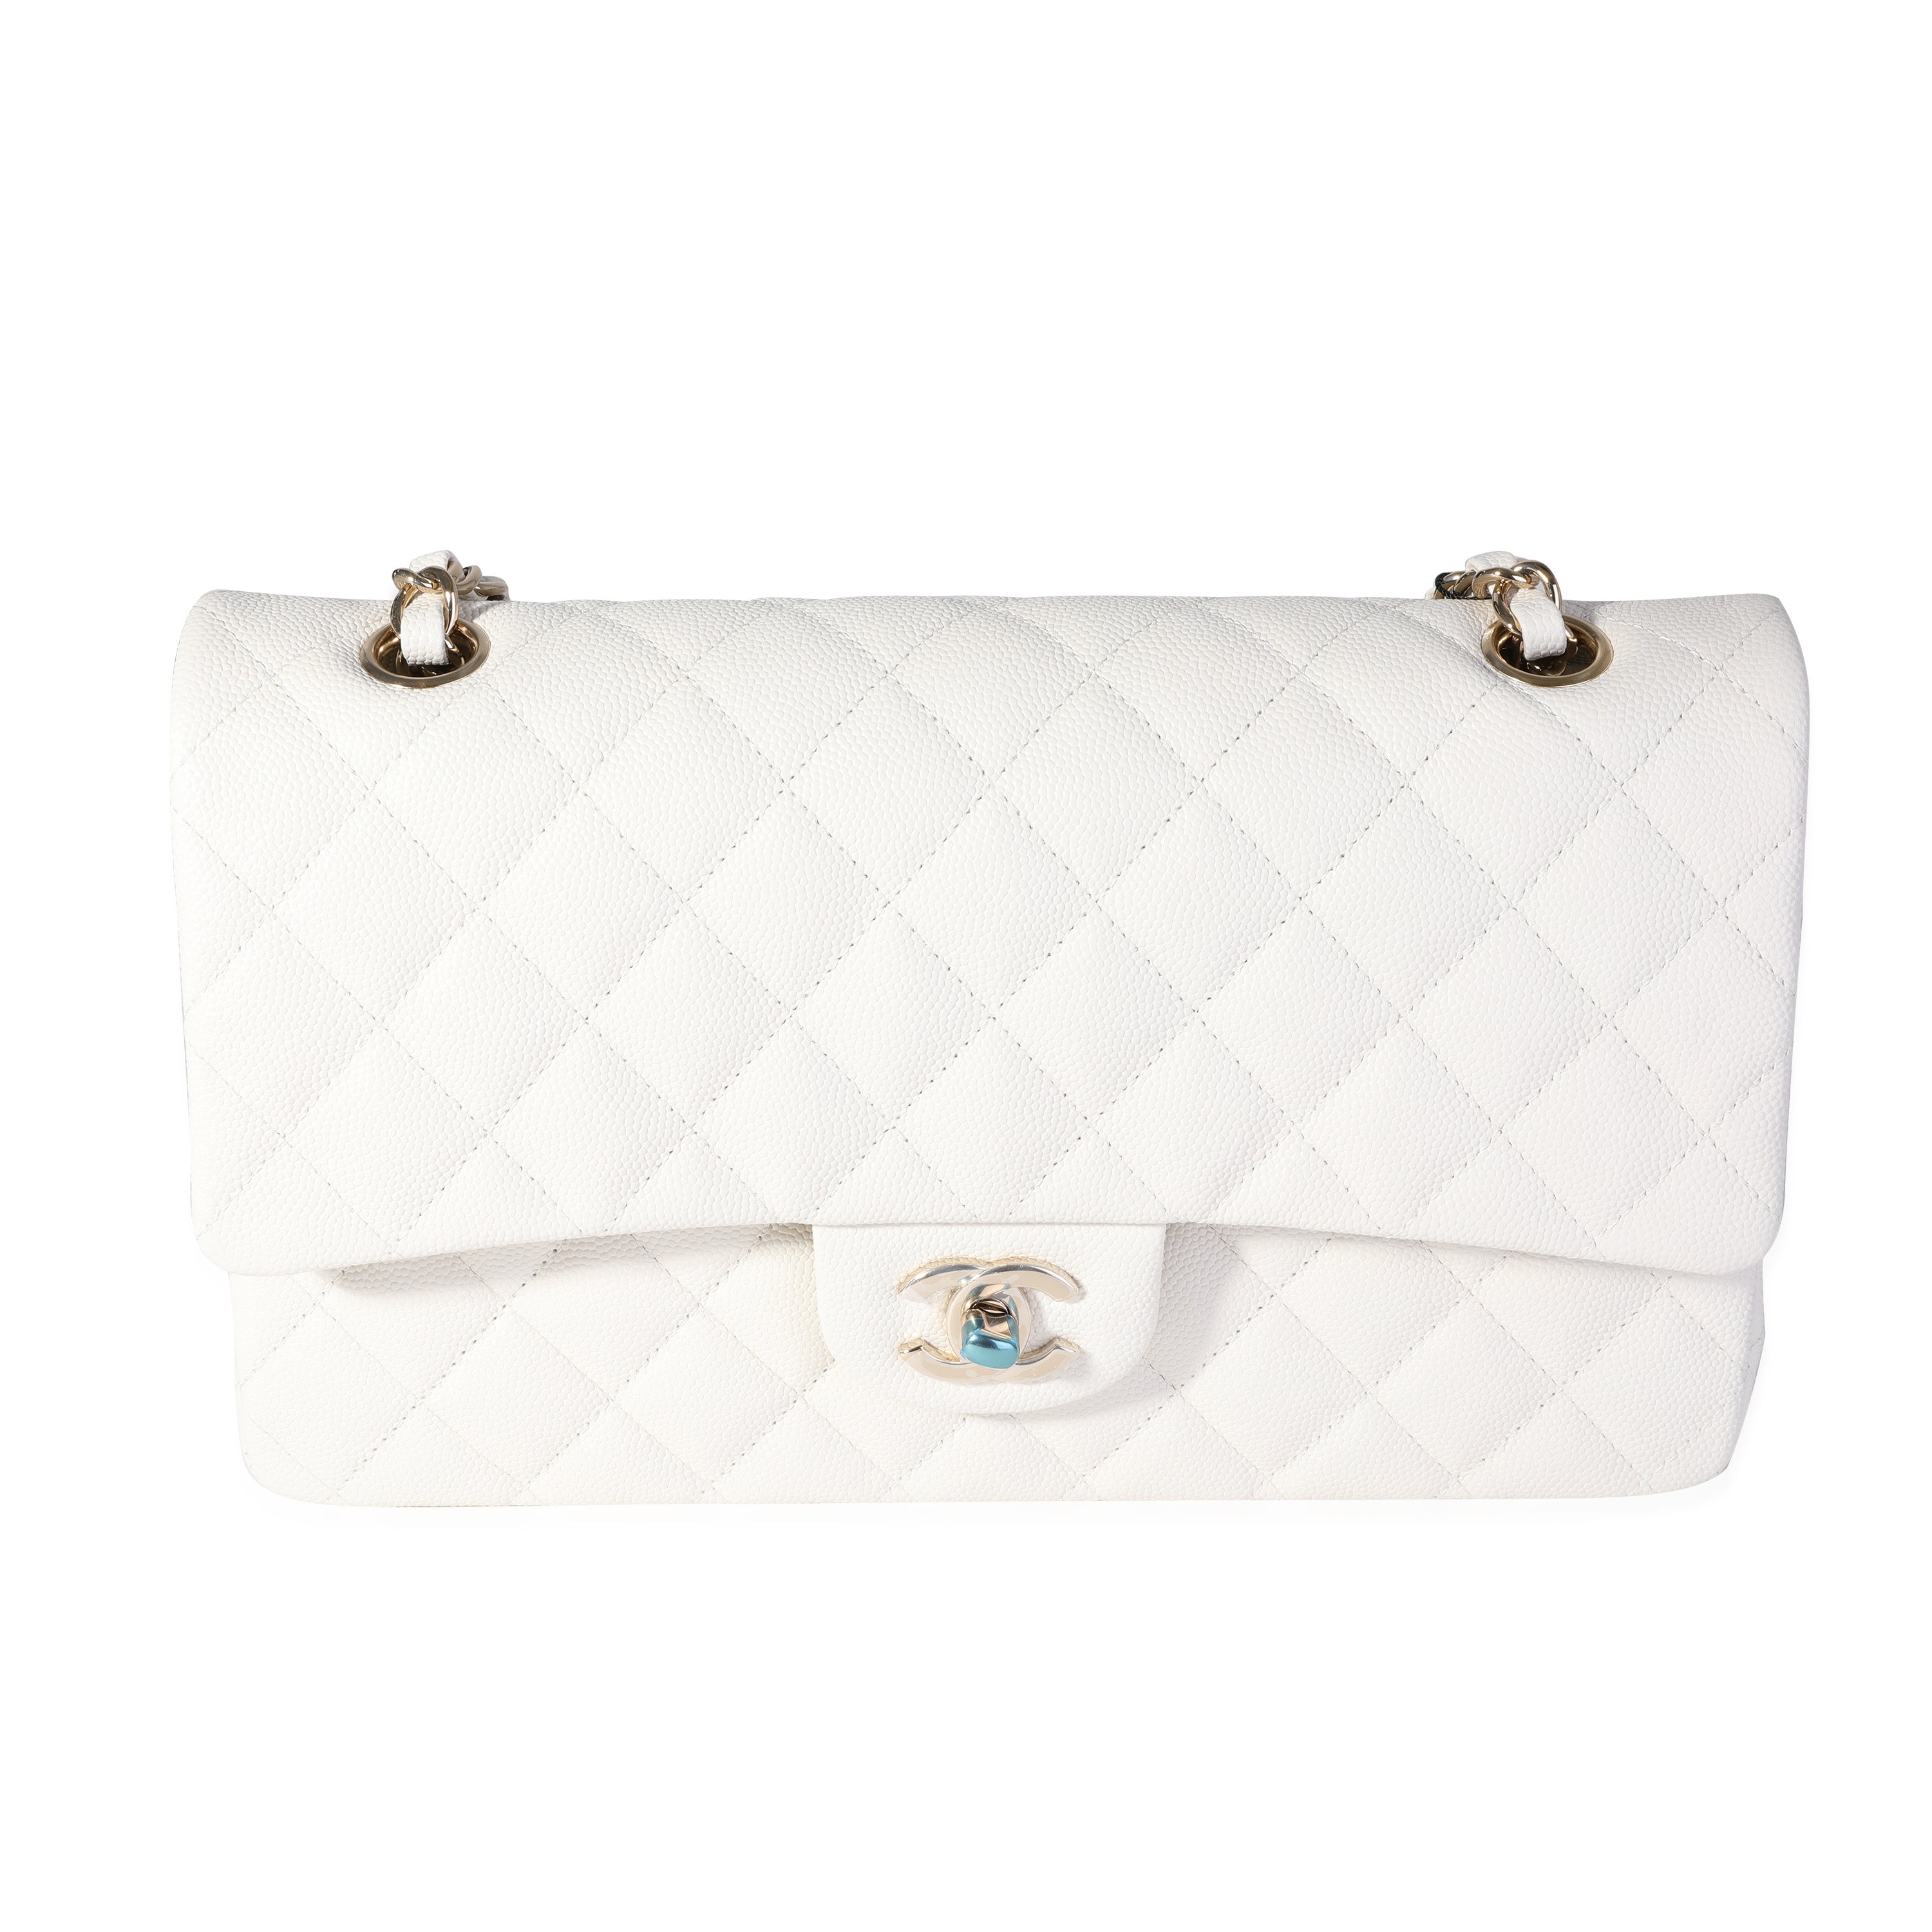 Chanel White Quilted Caviar Medium Classic Double Flap Bag, myGemma